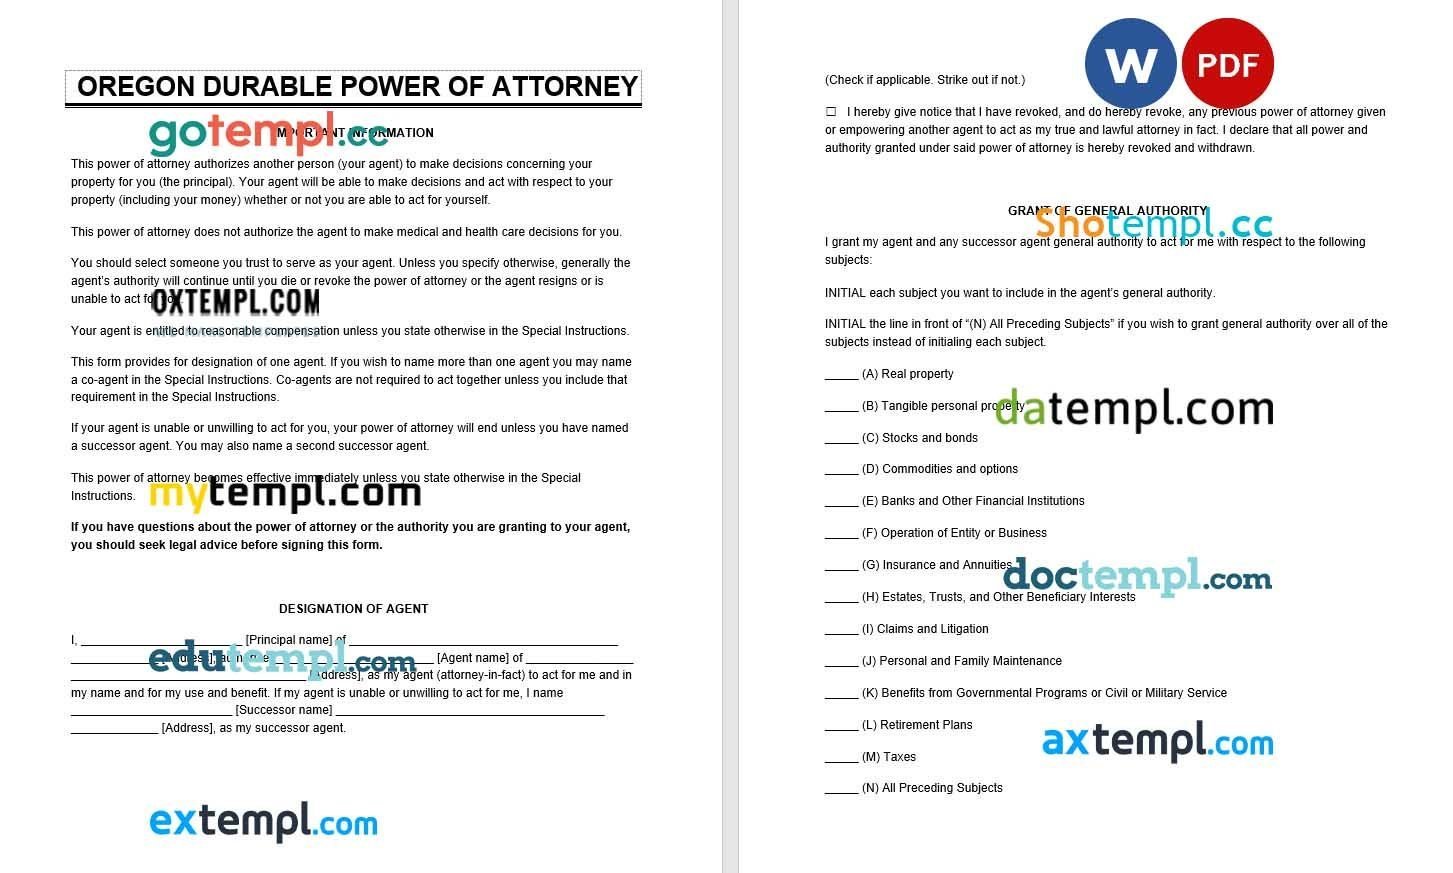 Oregon Durable Power of Attorney example, fully editable